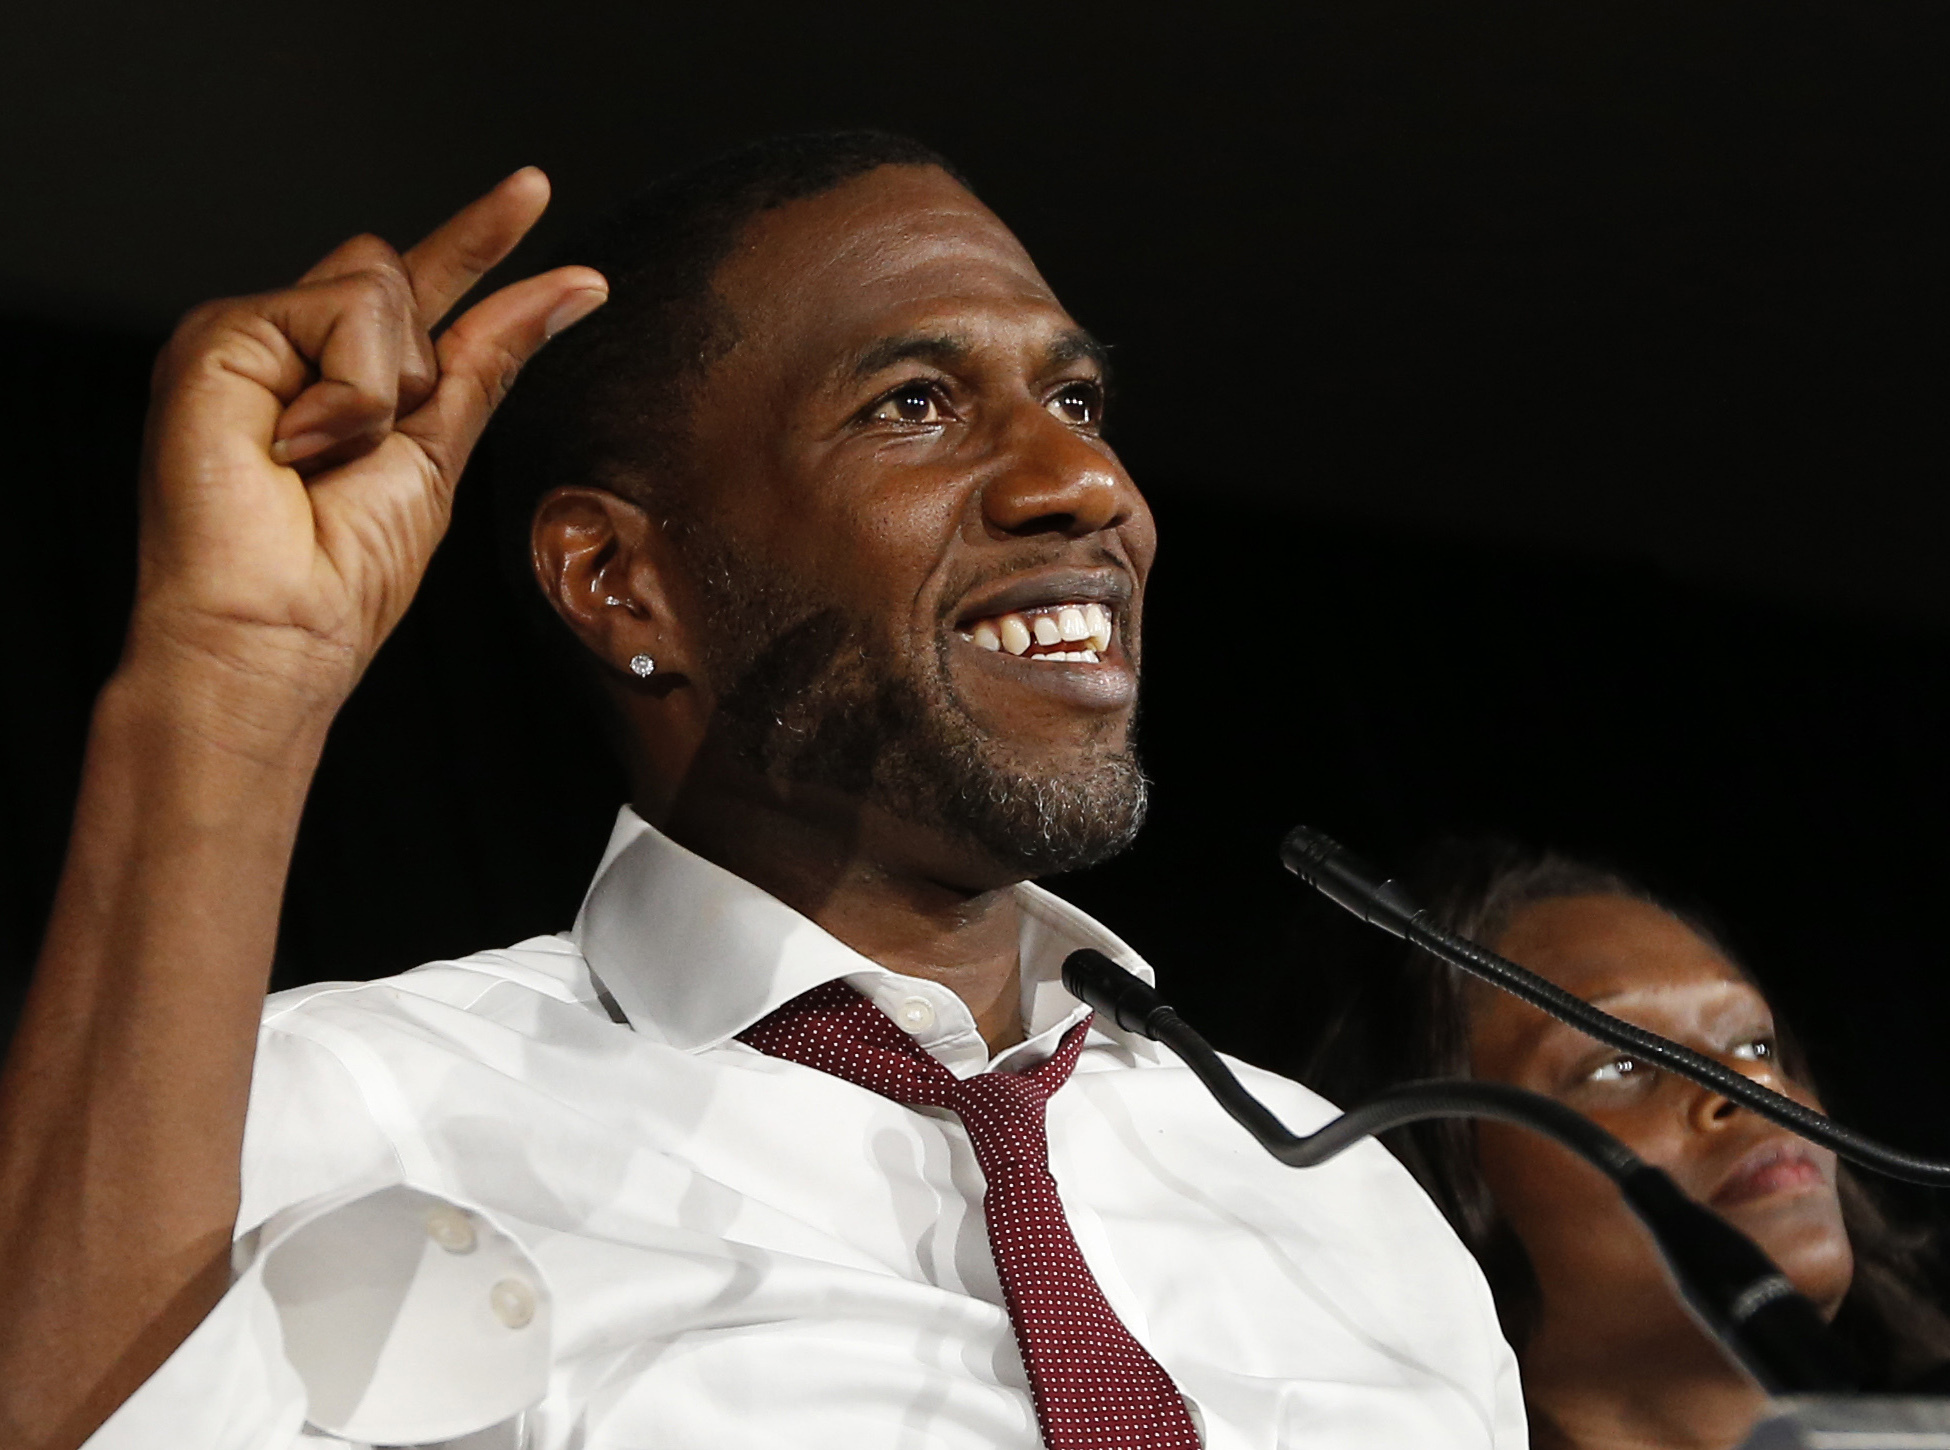 Former Councilmember Jumaane Williams resoundingly won the special election for New York City public advocate on Tuesday. AP Photo/Jason DeCrow, File